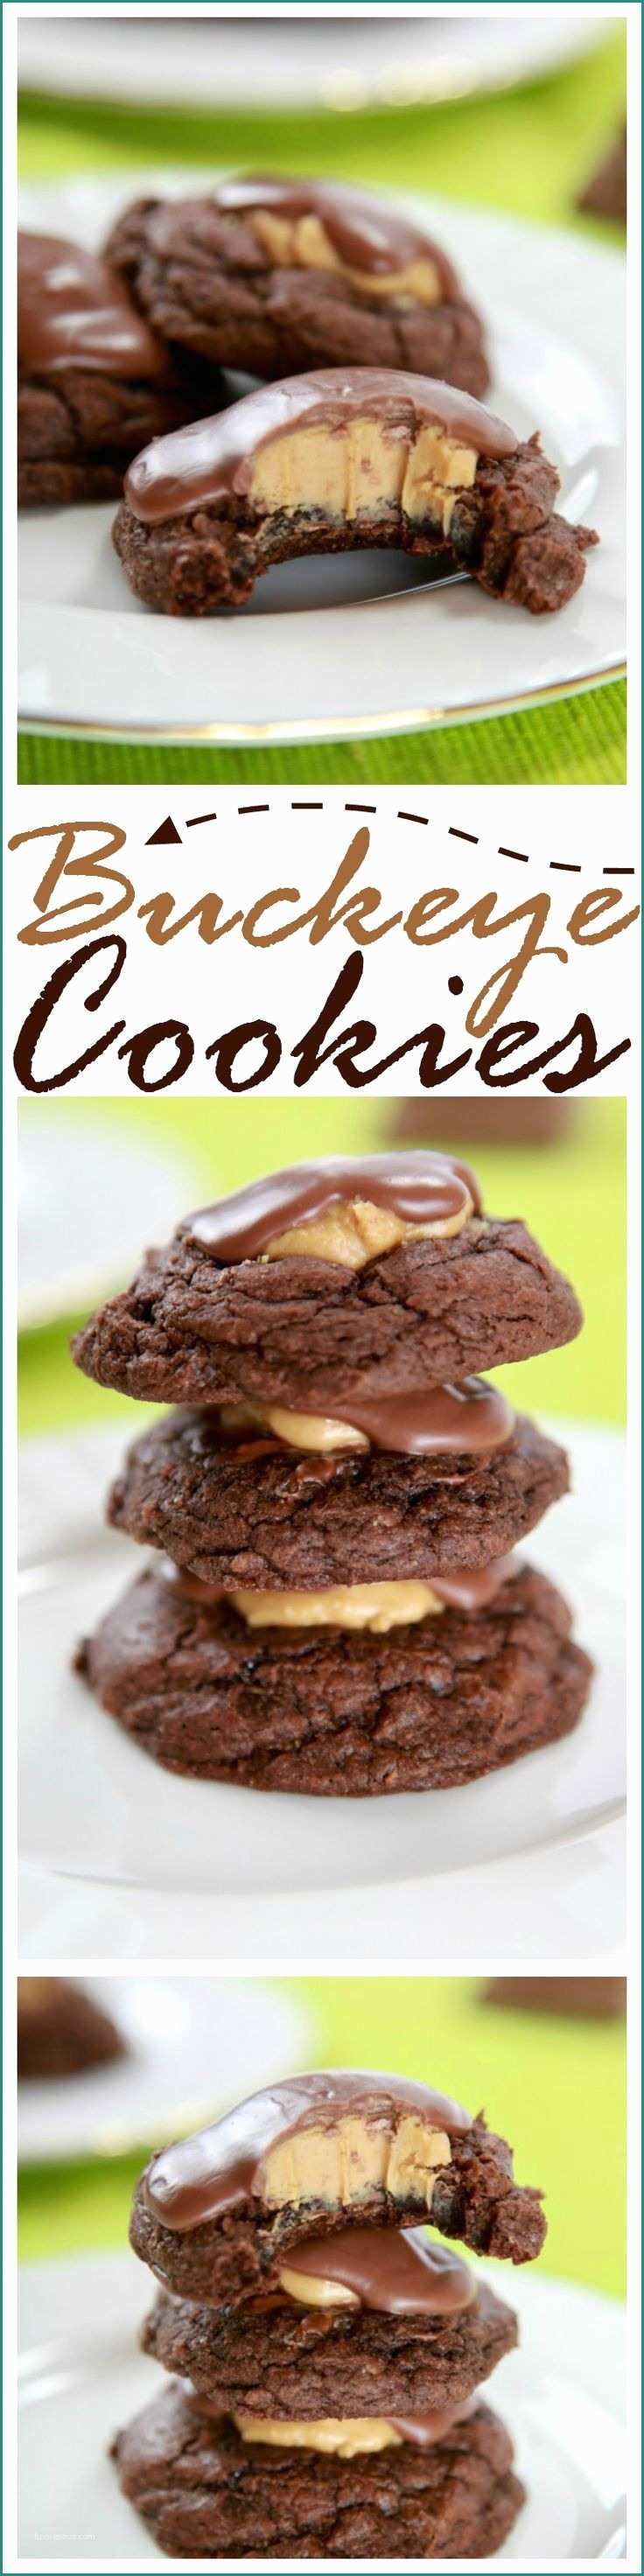 Nutella Bimby Tm E 84 Best Biscuits Cakes Images On Pinterest